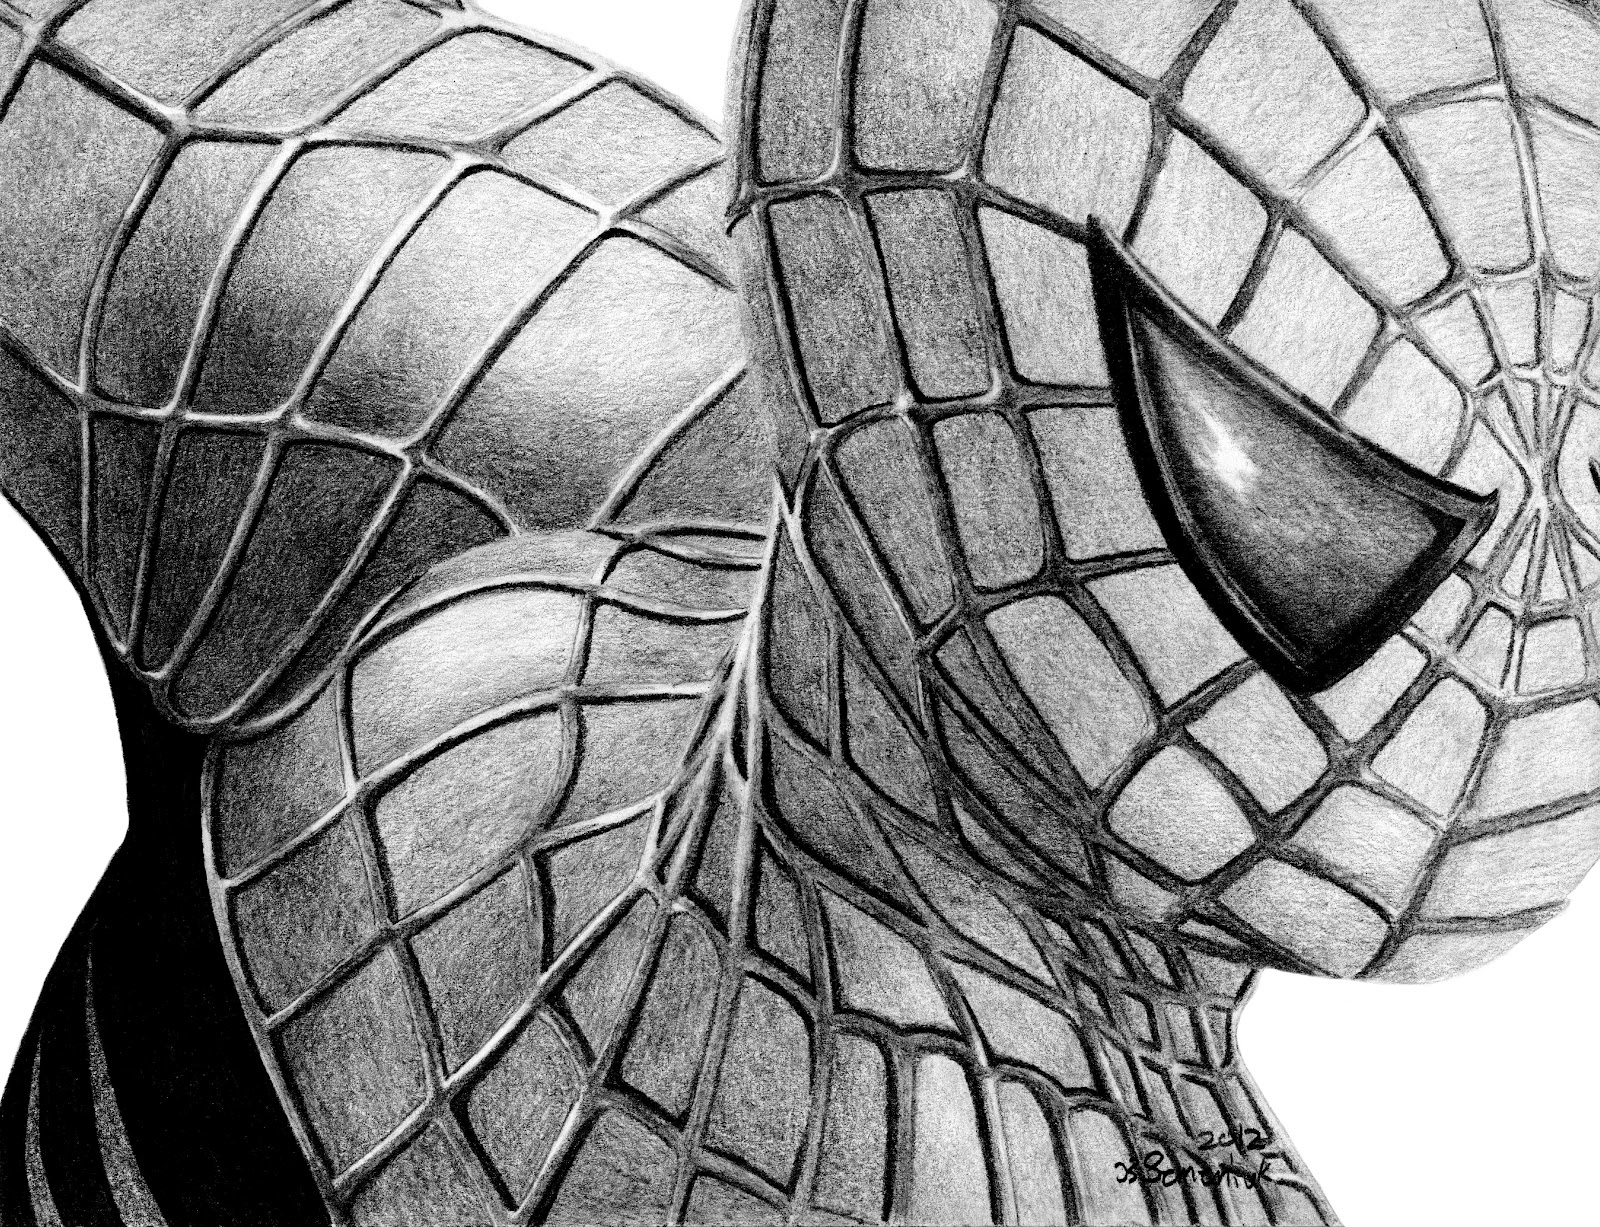 Spider Man Sketch Easy at Explore collection of